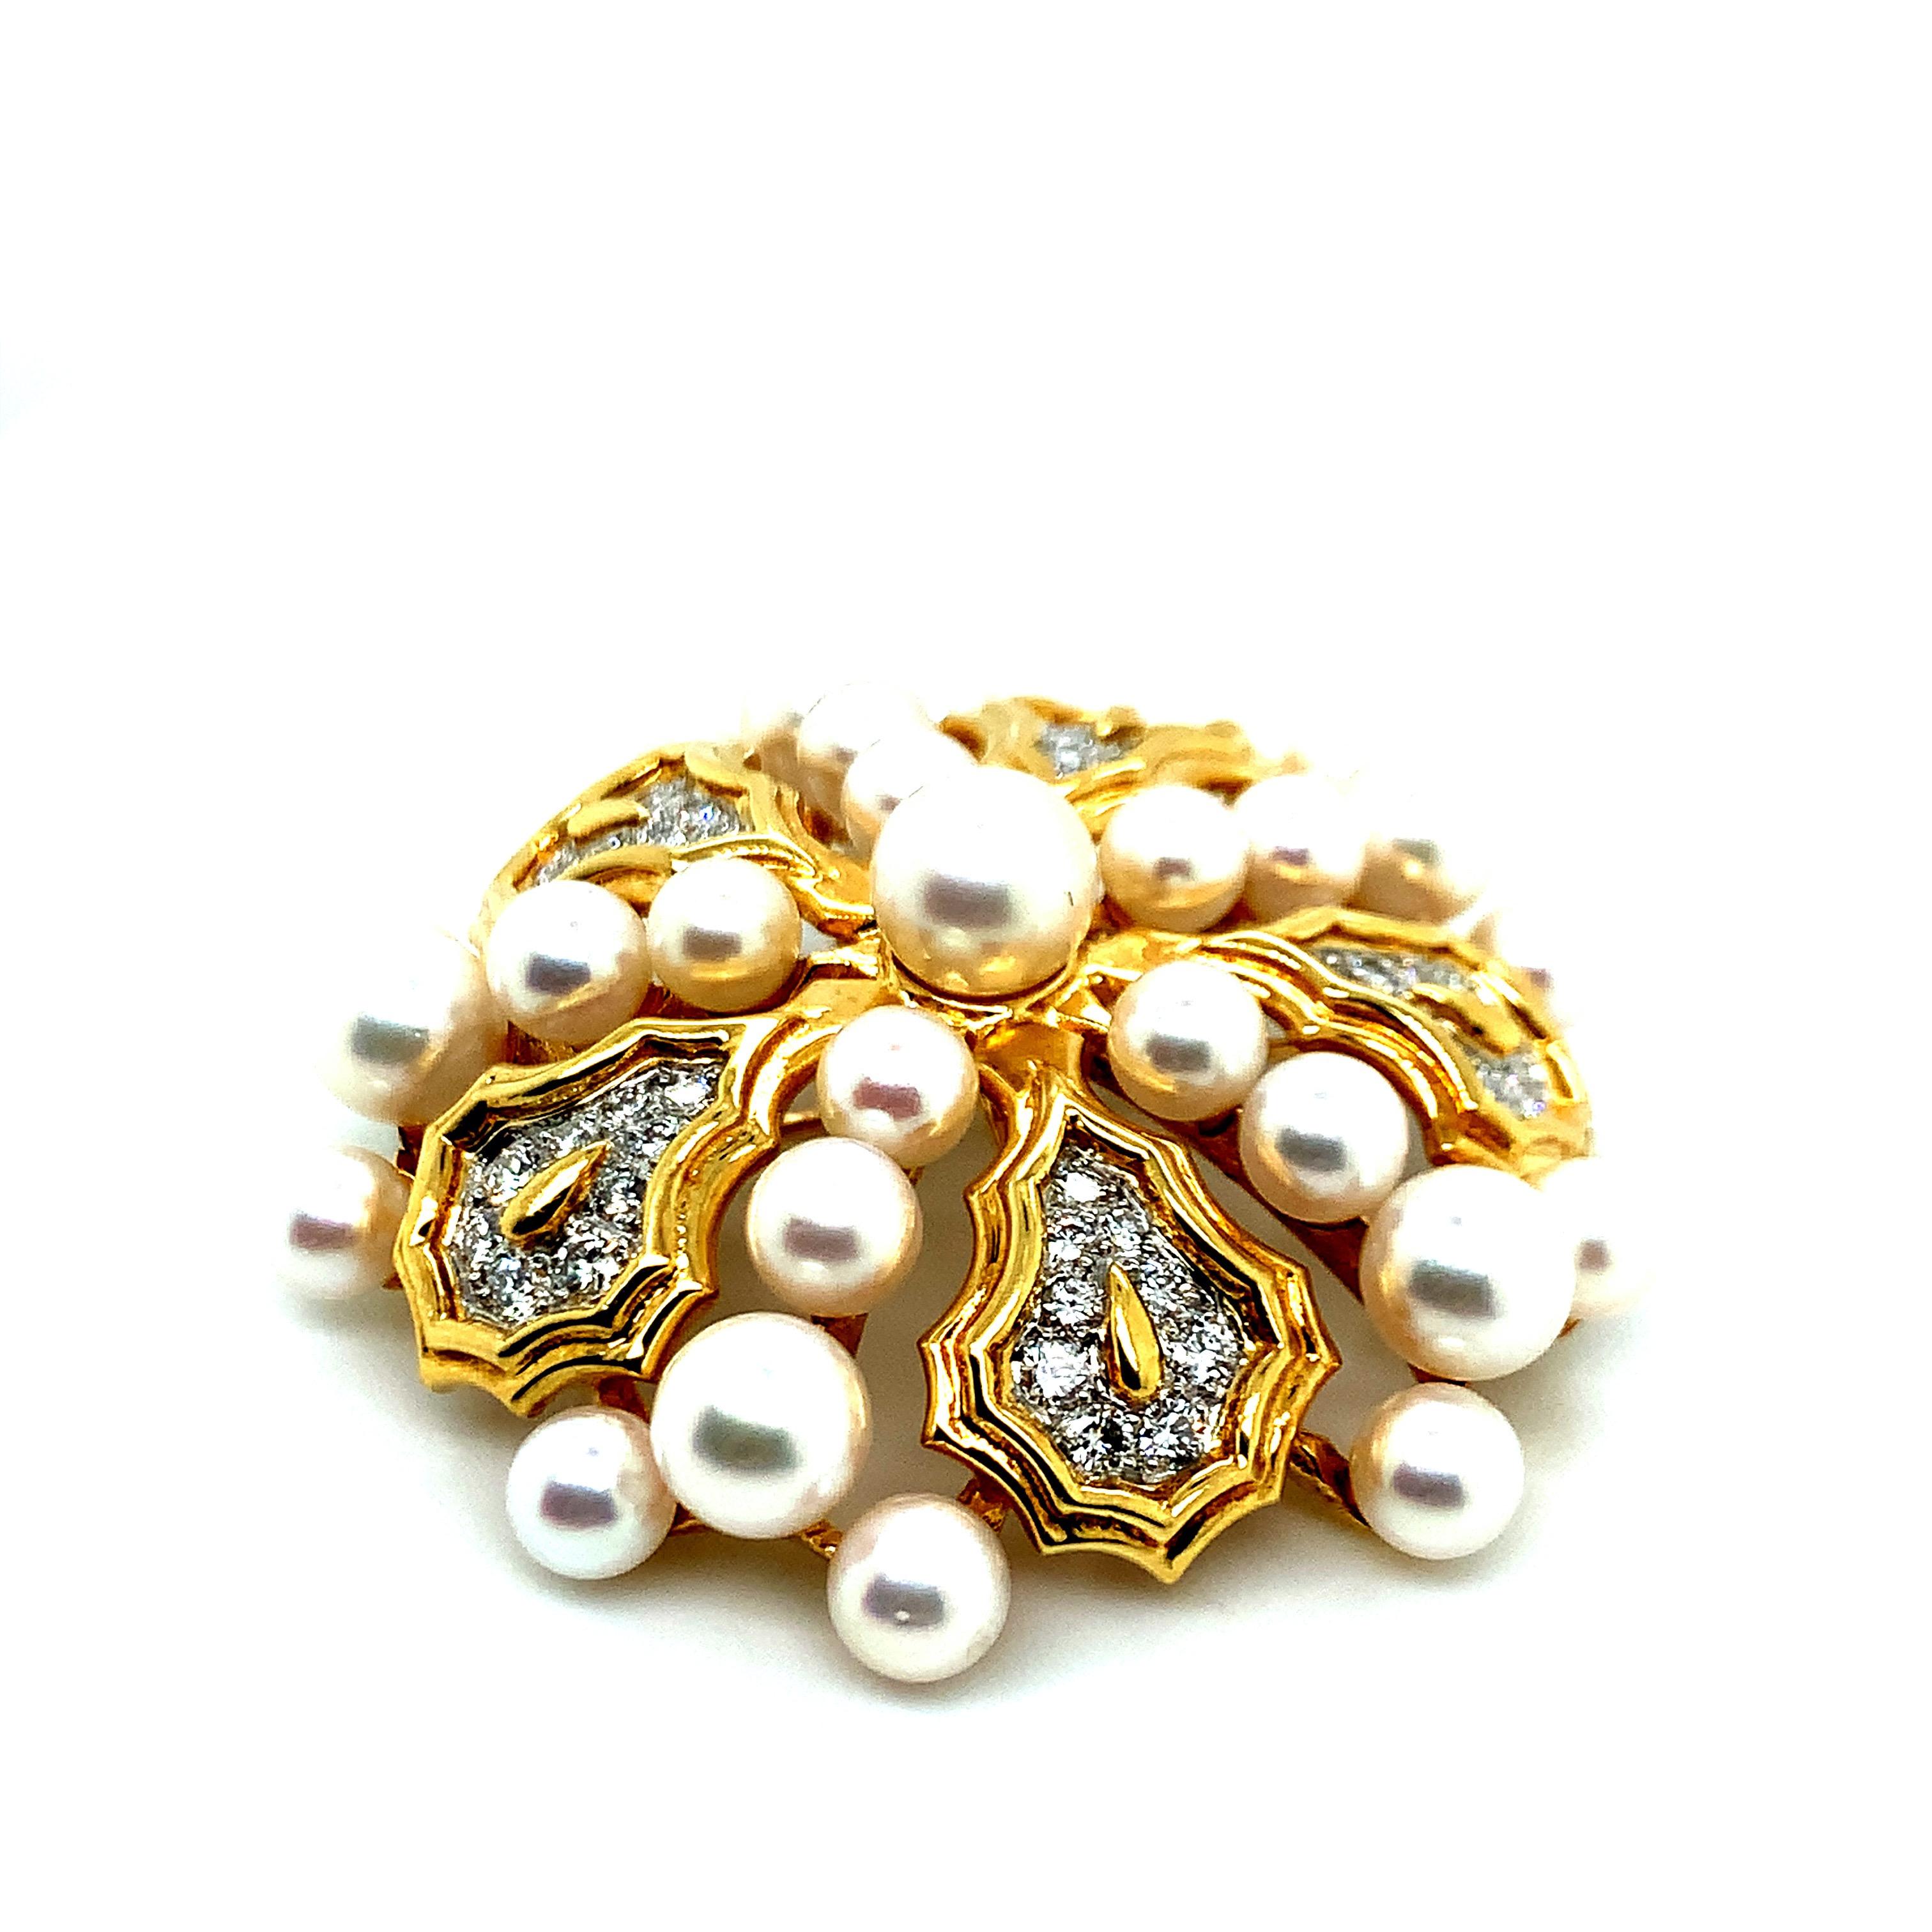 Women's Tiffany & Co. Gold Diamond and Pearl Brooch